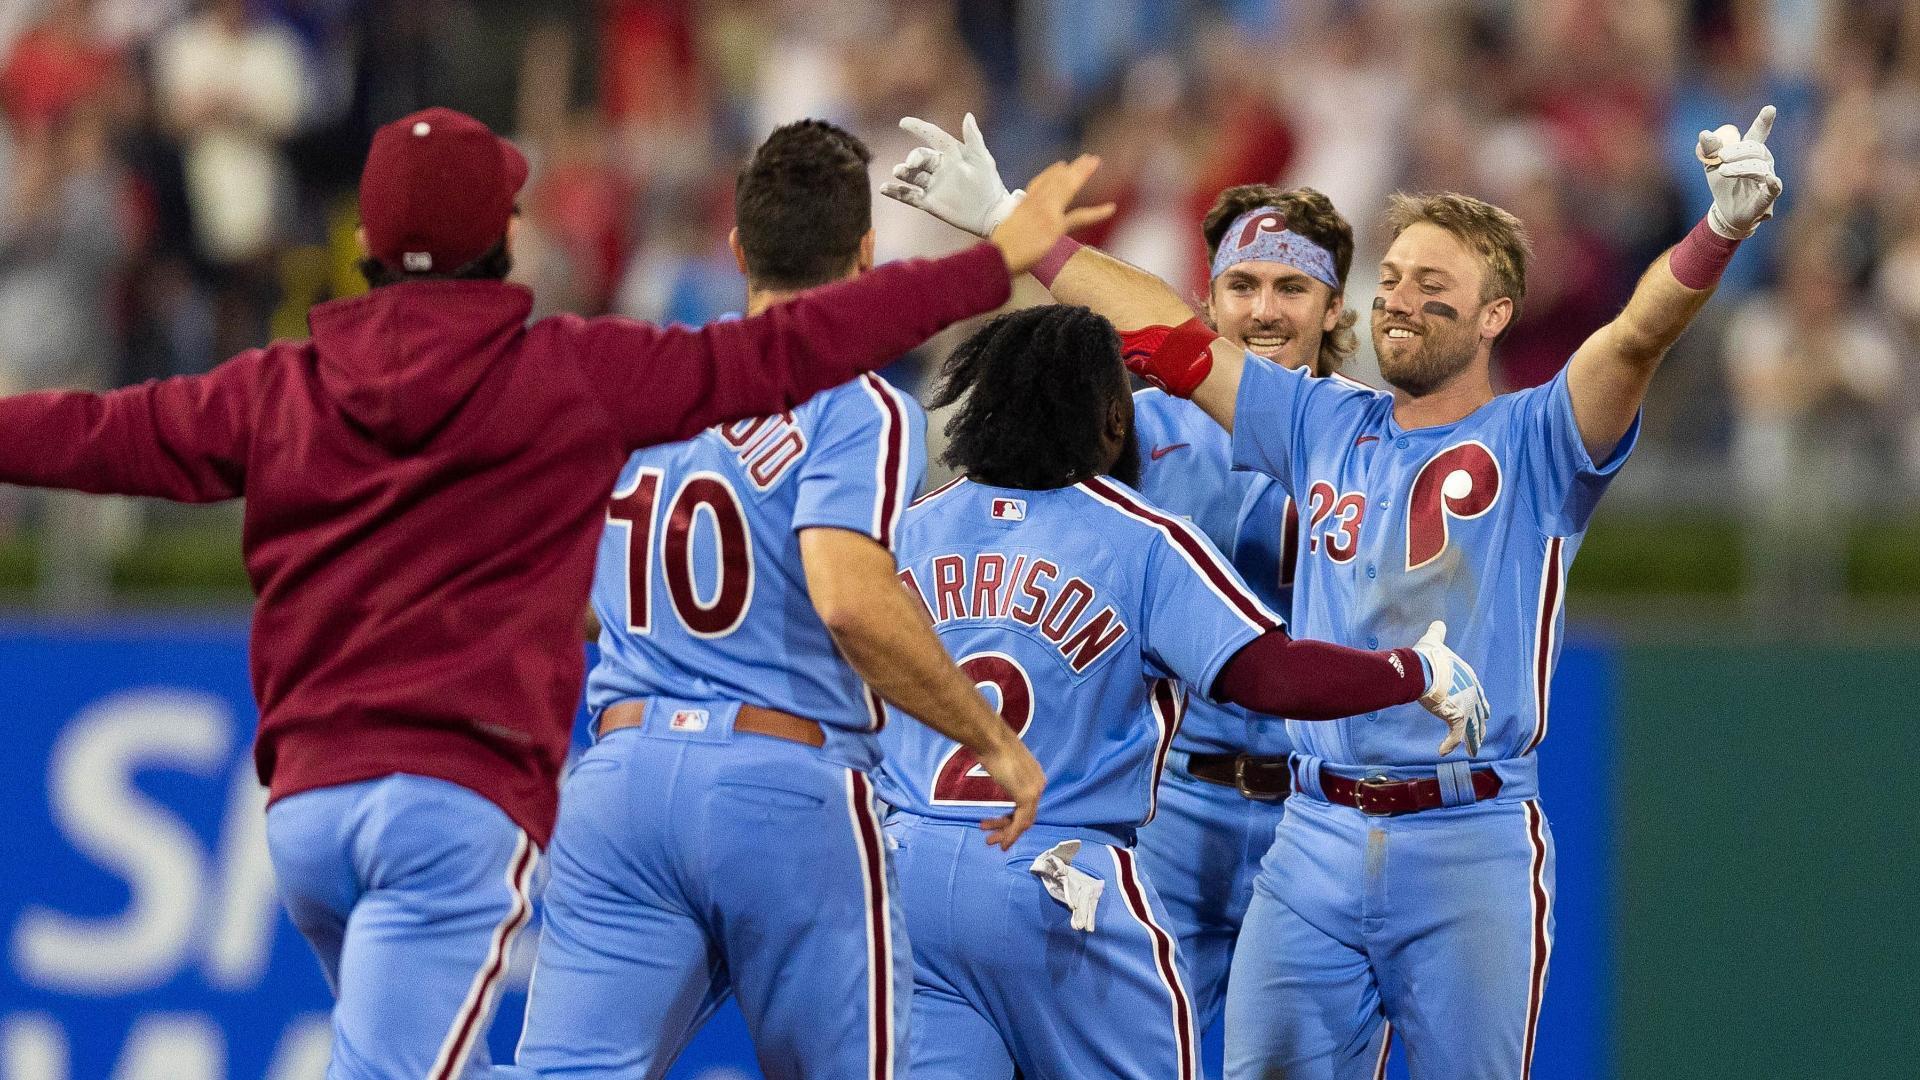 Wheeler, Clemens lead Phillies past Tigers 3-2 in walkoff win